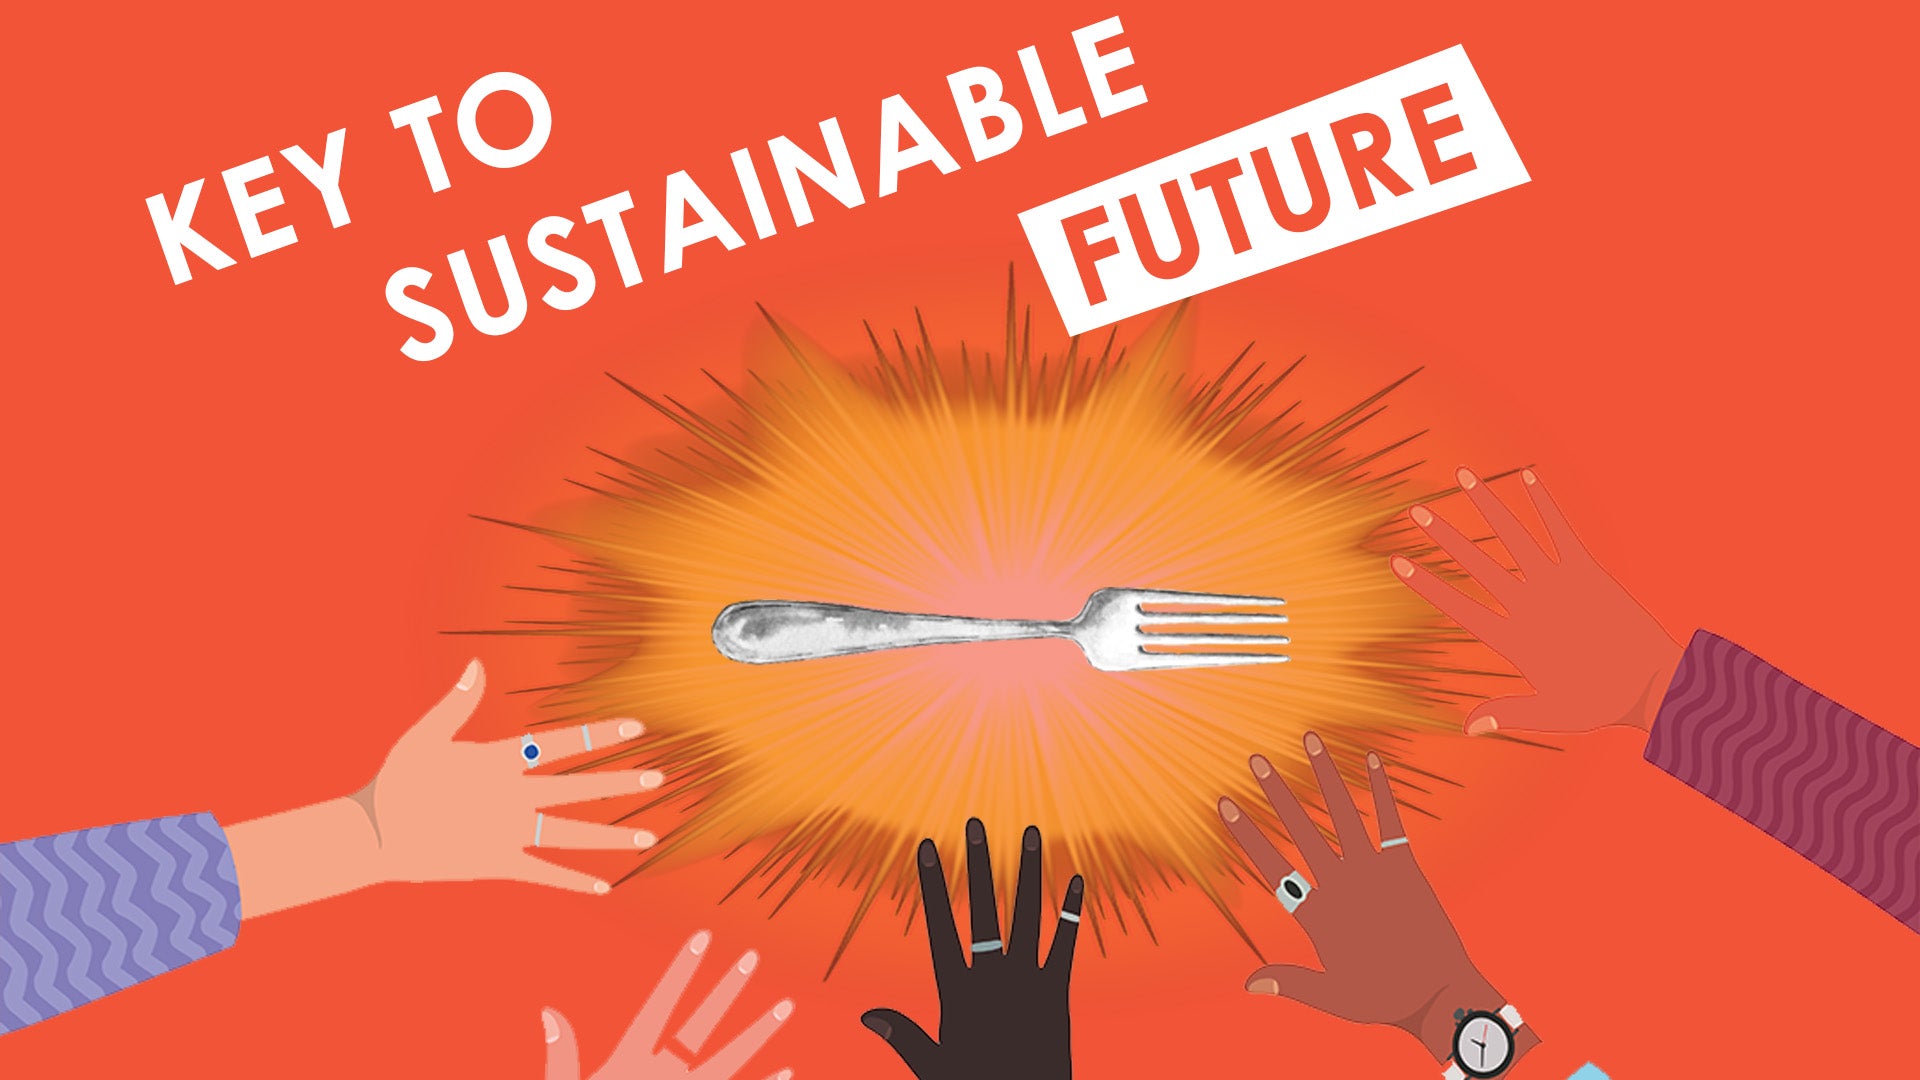 A key to more sustainable future?